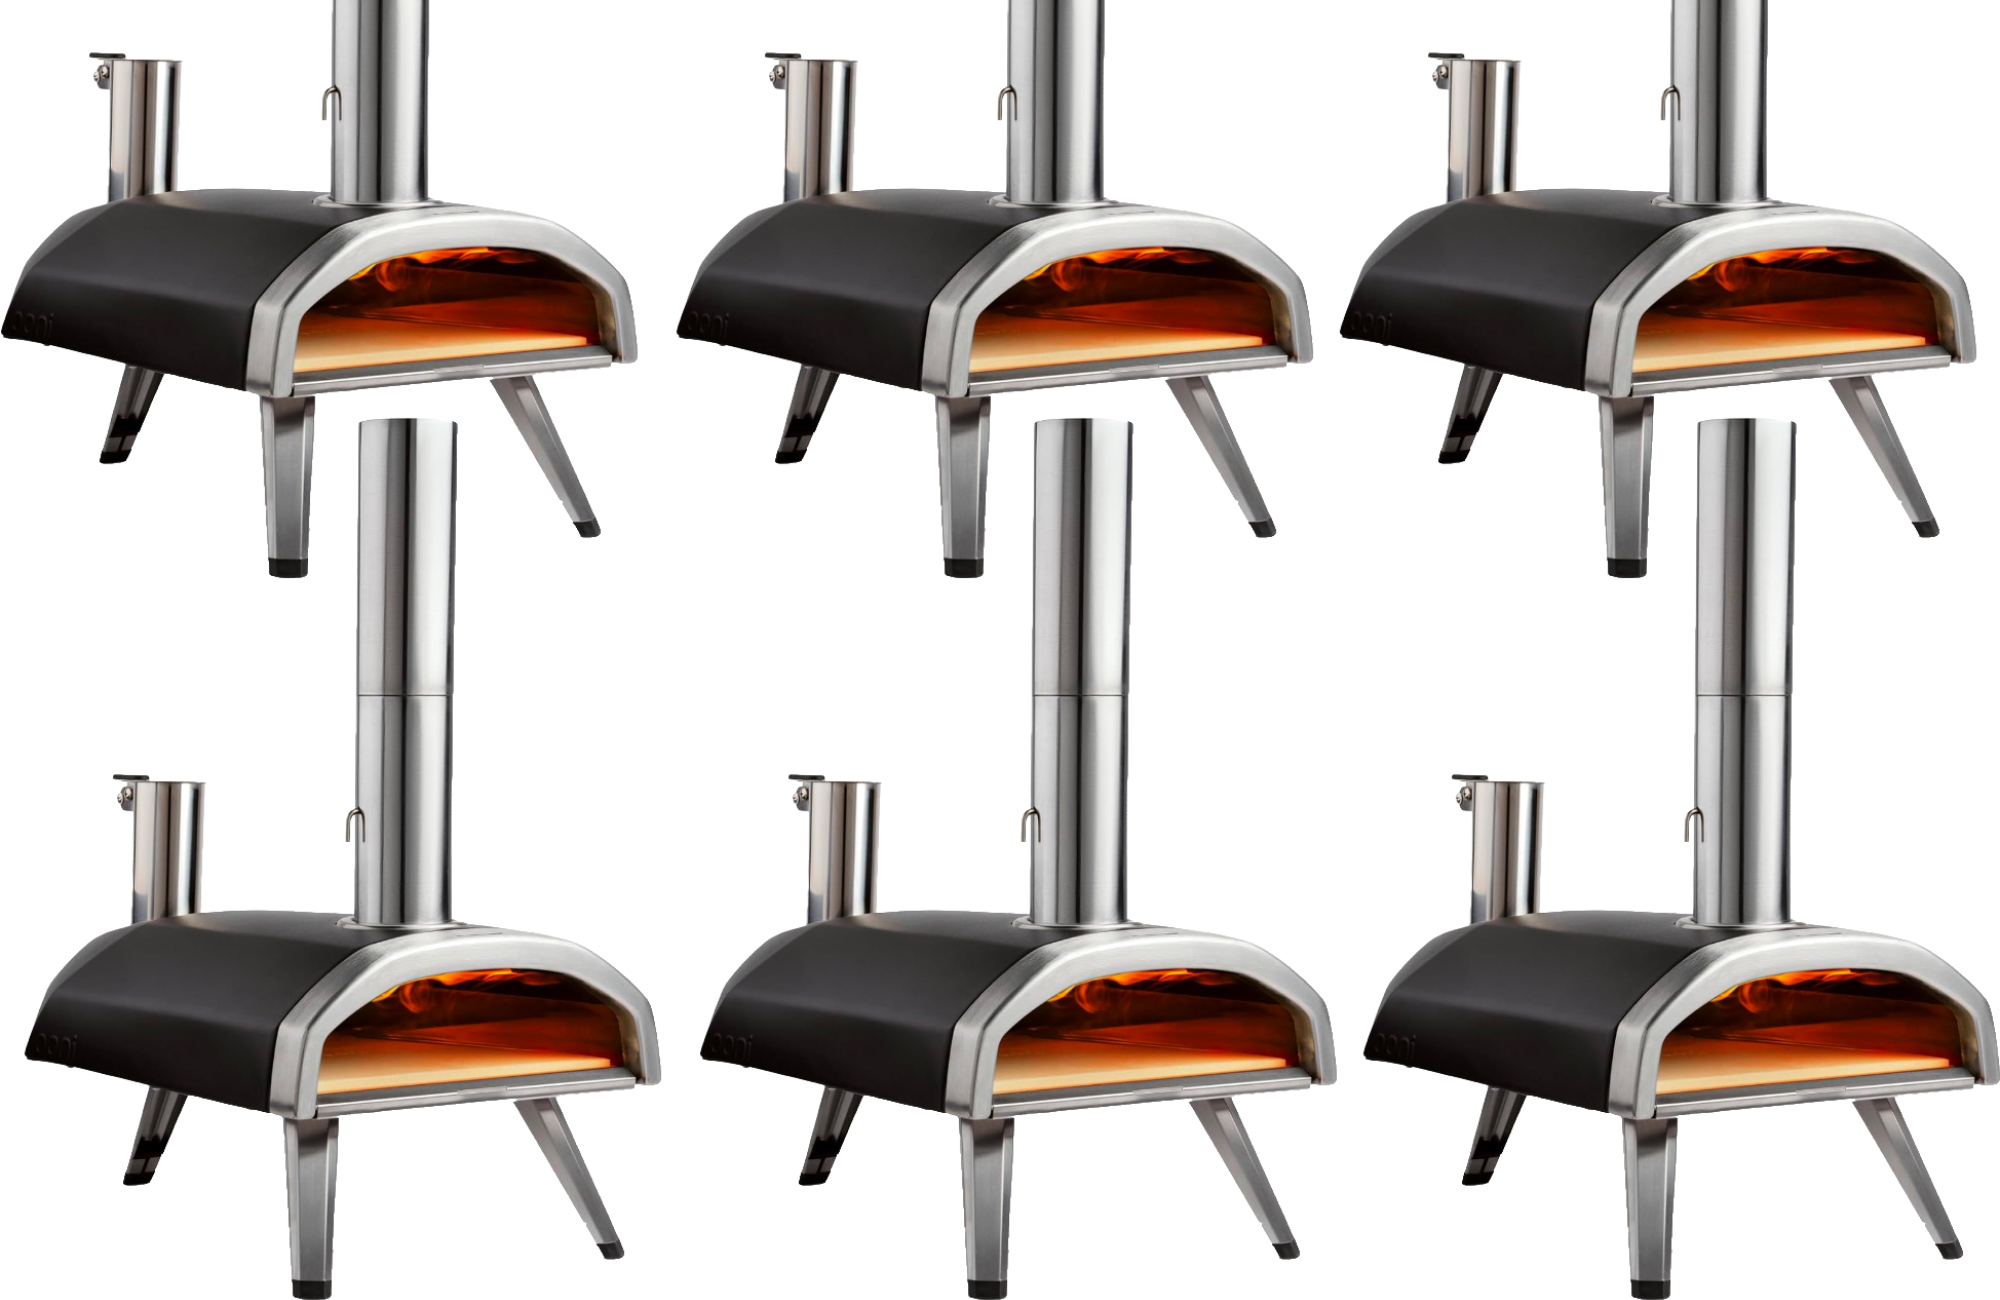 Ooni's pizza oven is down to its lowest price ever on  for Cyber  Monday